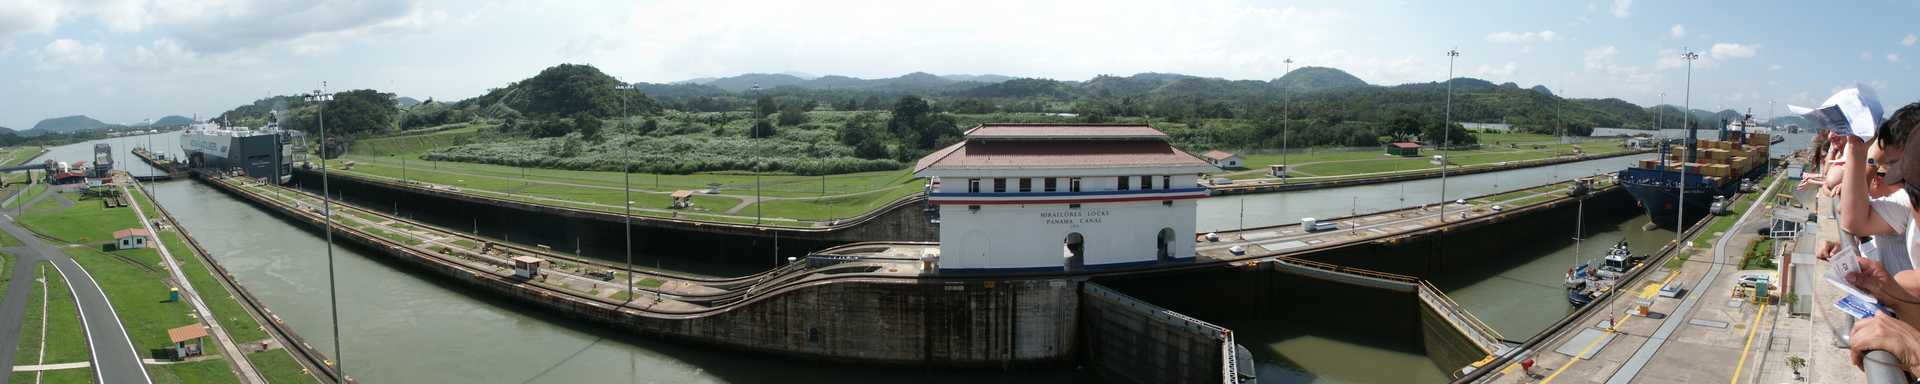 The famous Panama Canal